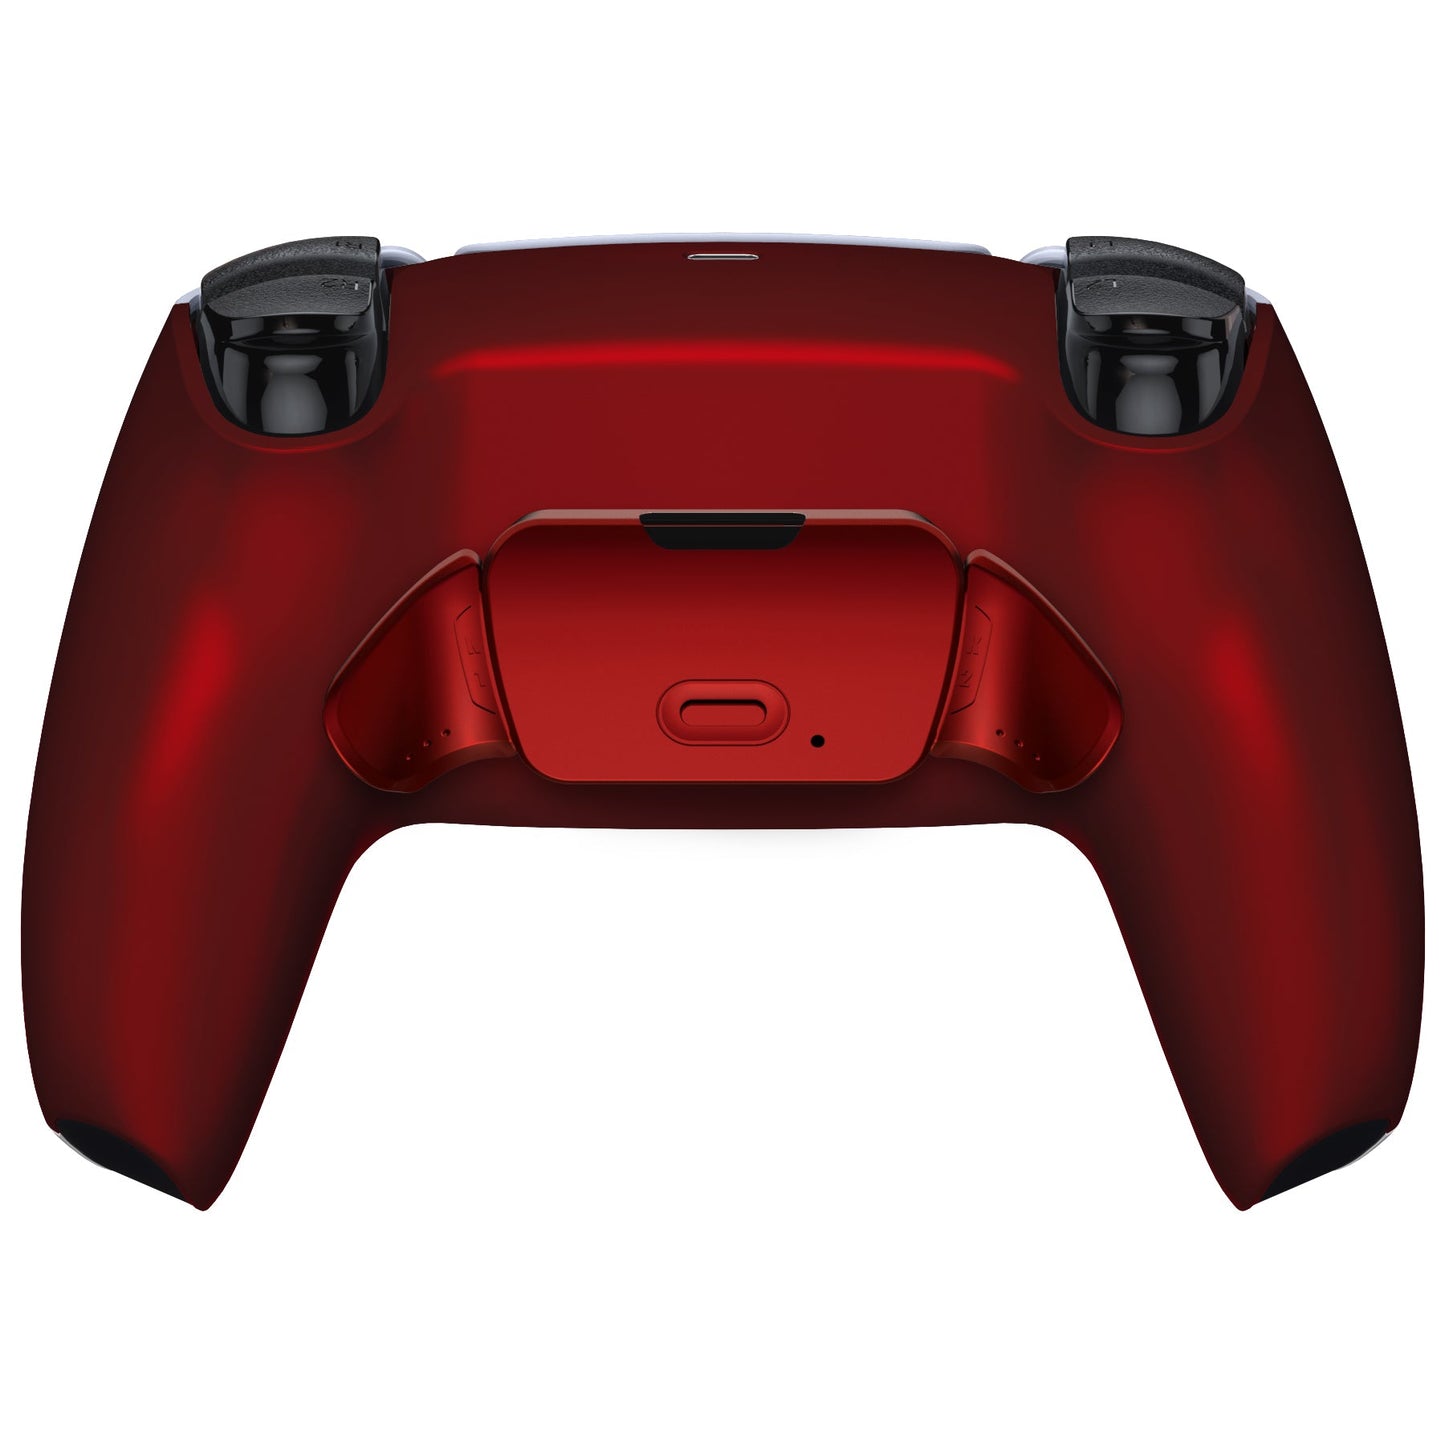 eXtremeRate Retail Scarlet Red Back Paddles Remappable Rise Remap Kit with Upgrade Board & Redesigned Back Shell & Back Buttons Attachment for ps5 Controller BDM-010 & BDM-020 - XPFP3003G2